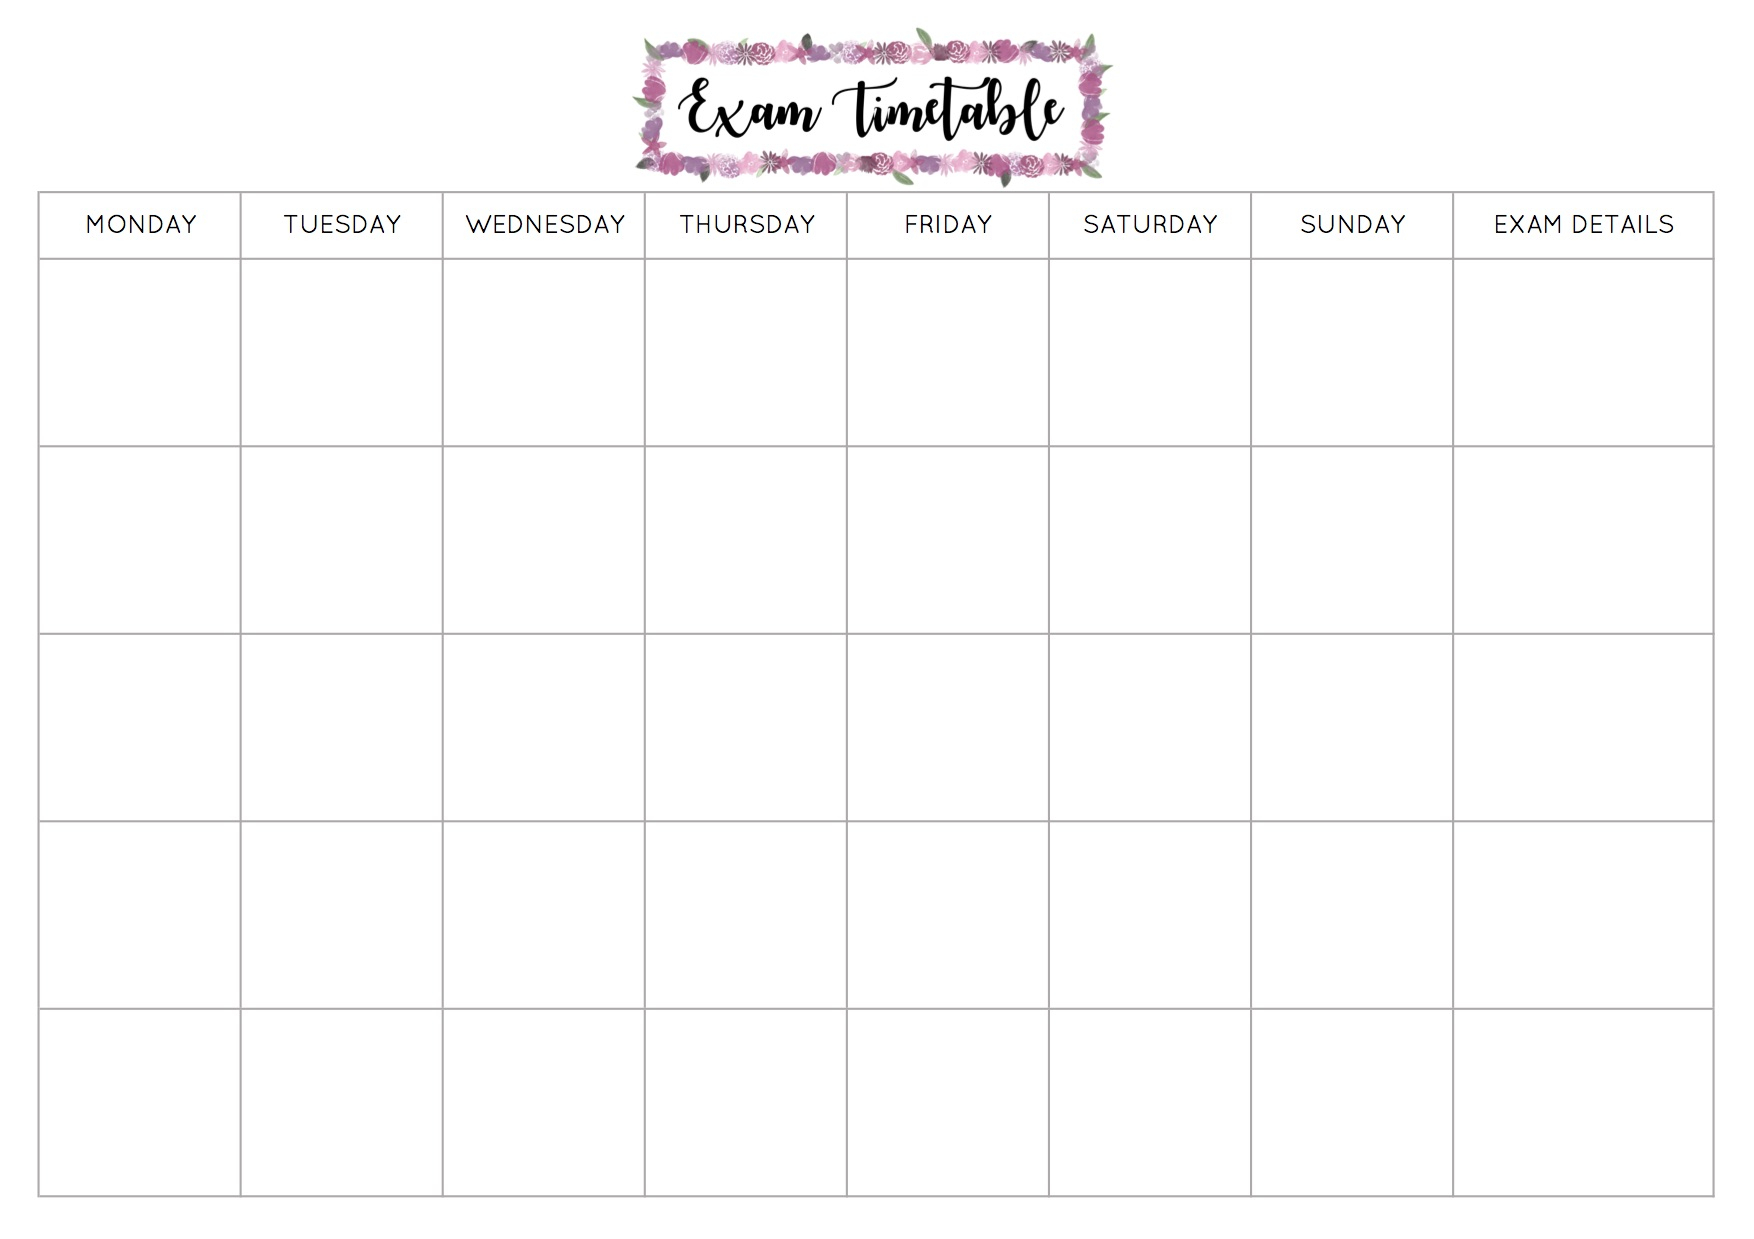 Free Exam Timetable Printable Within Blank Revision Timetable Template